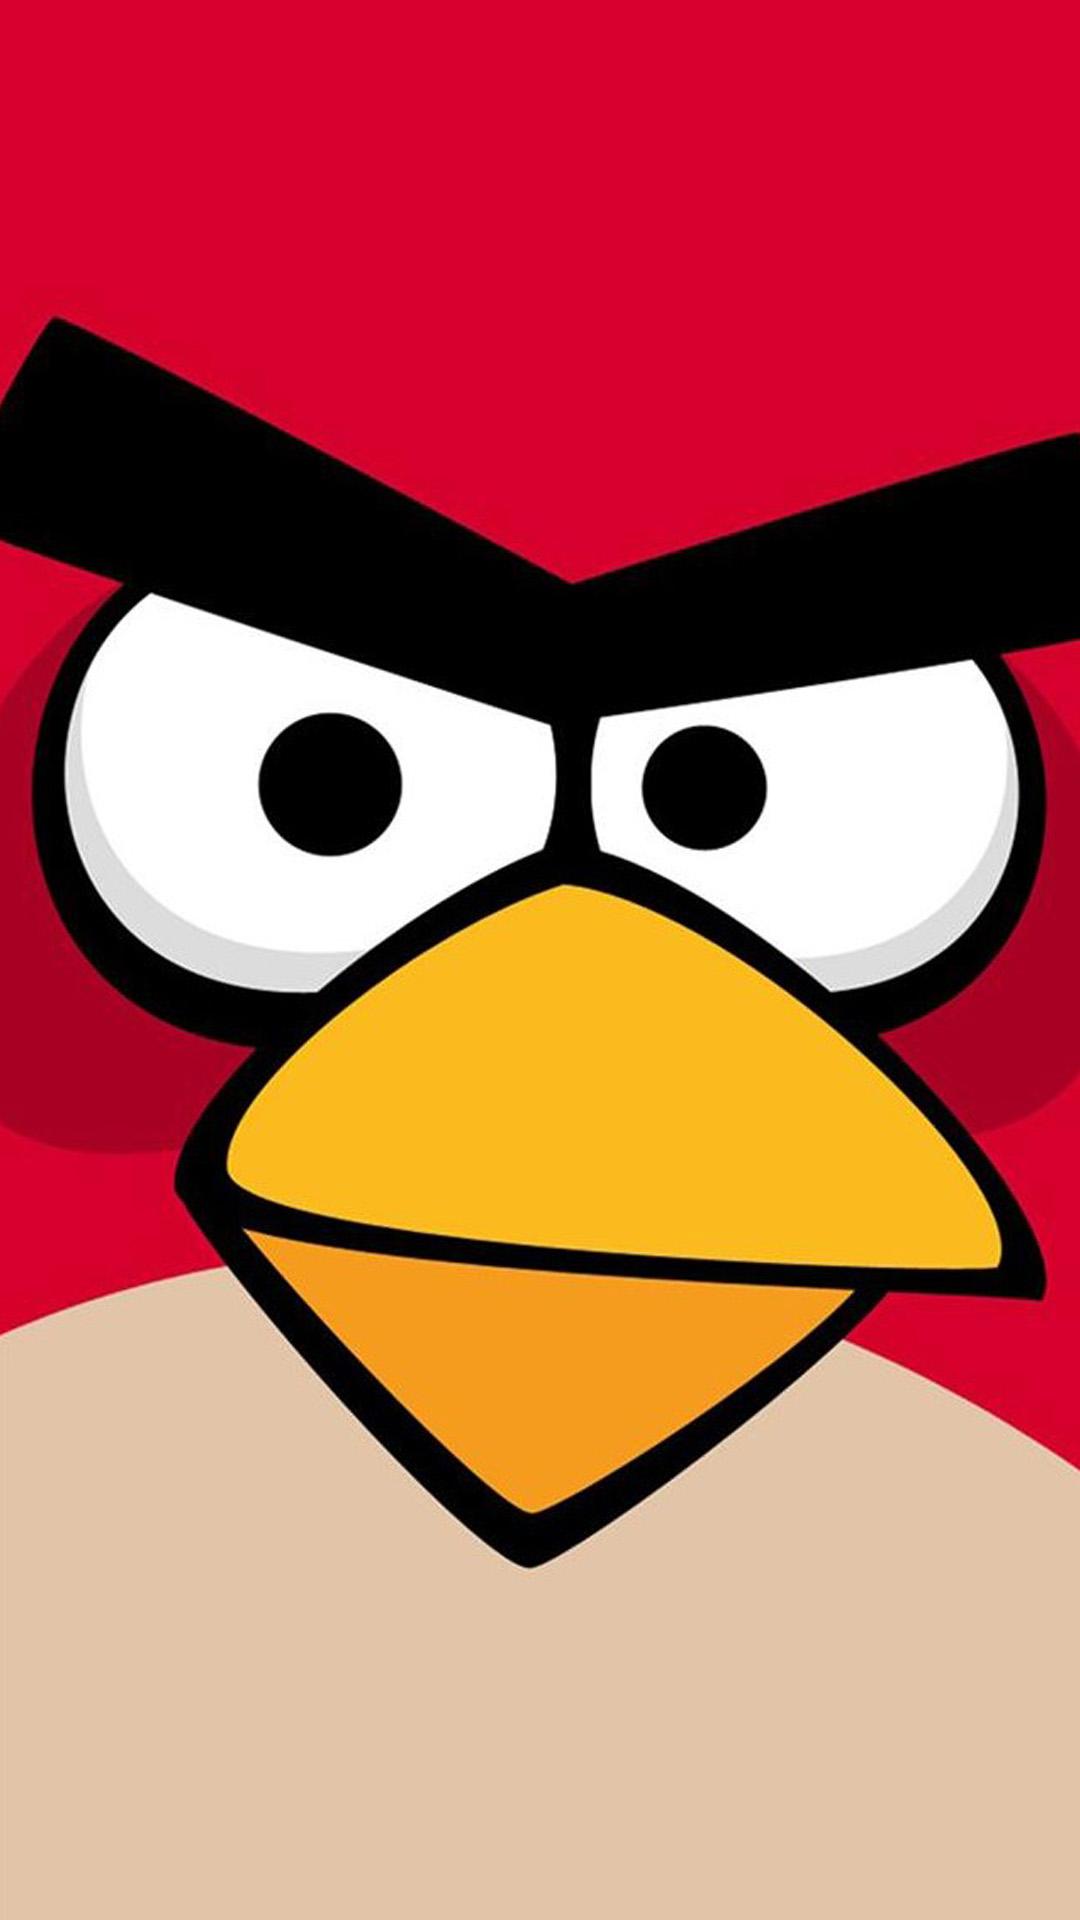 Angry Bird Game Background iPhone 8 Wallpaper Free Download